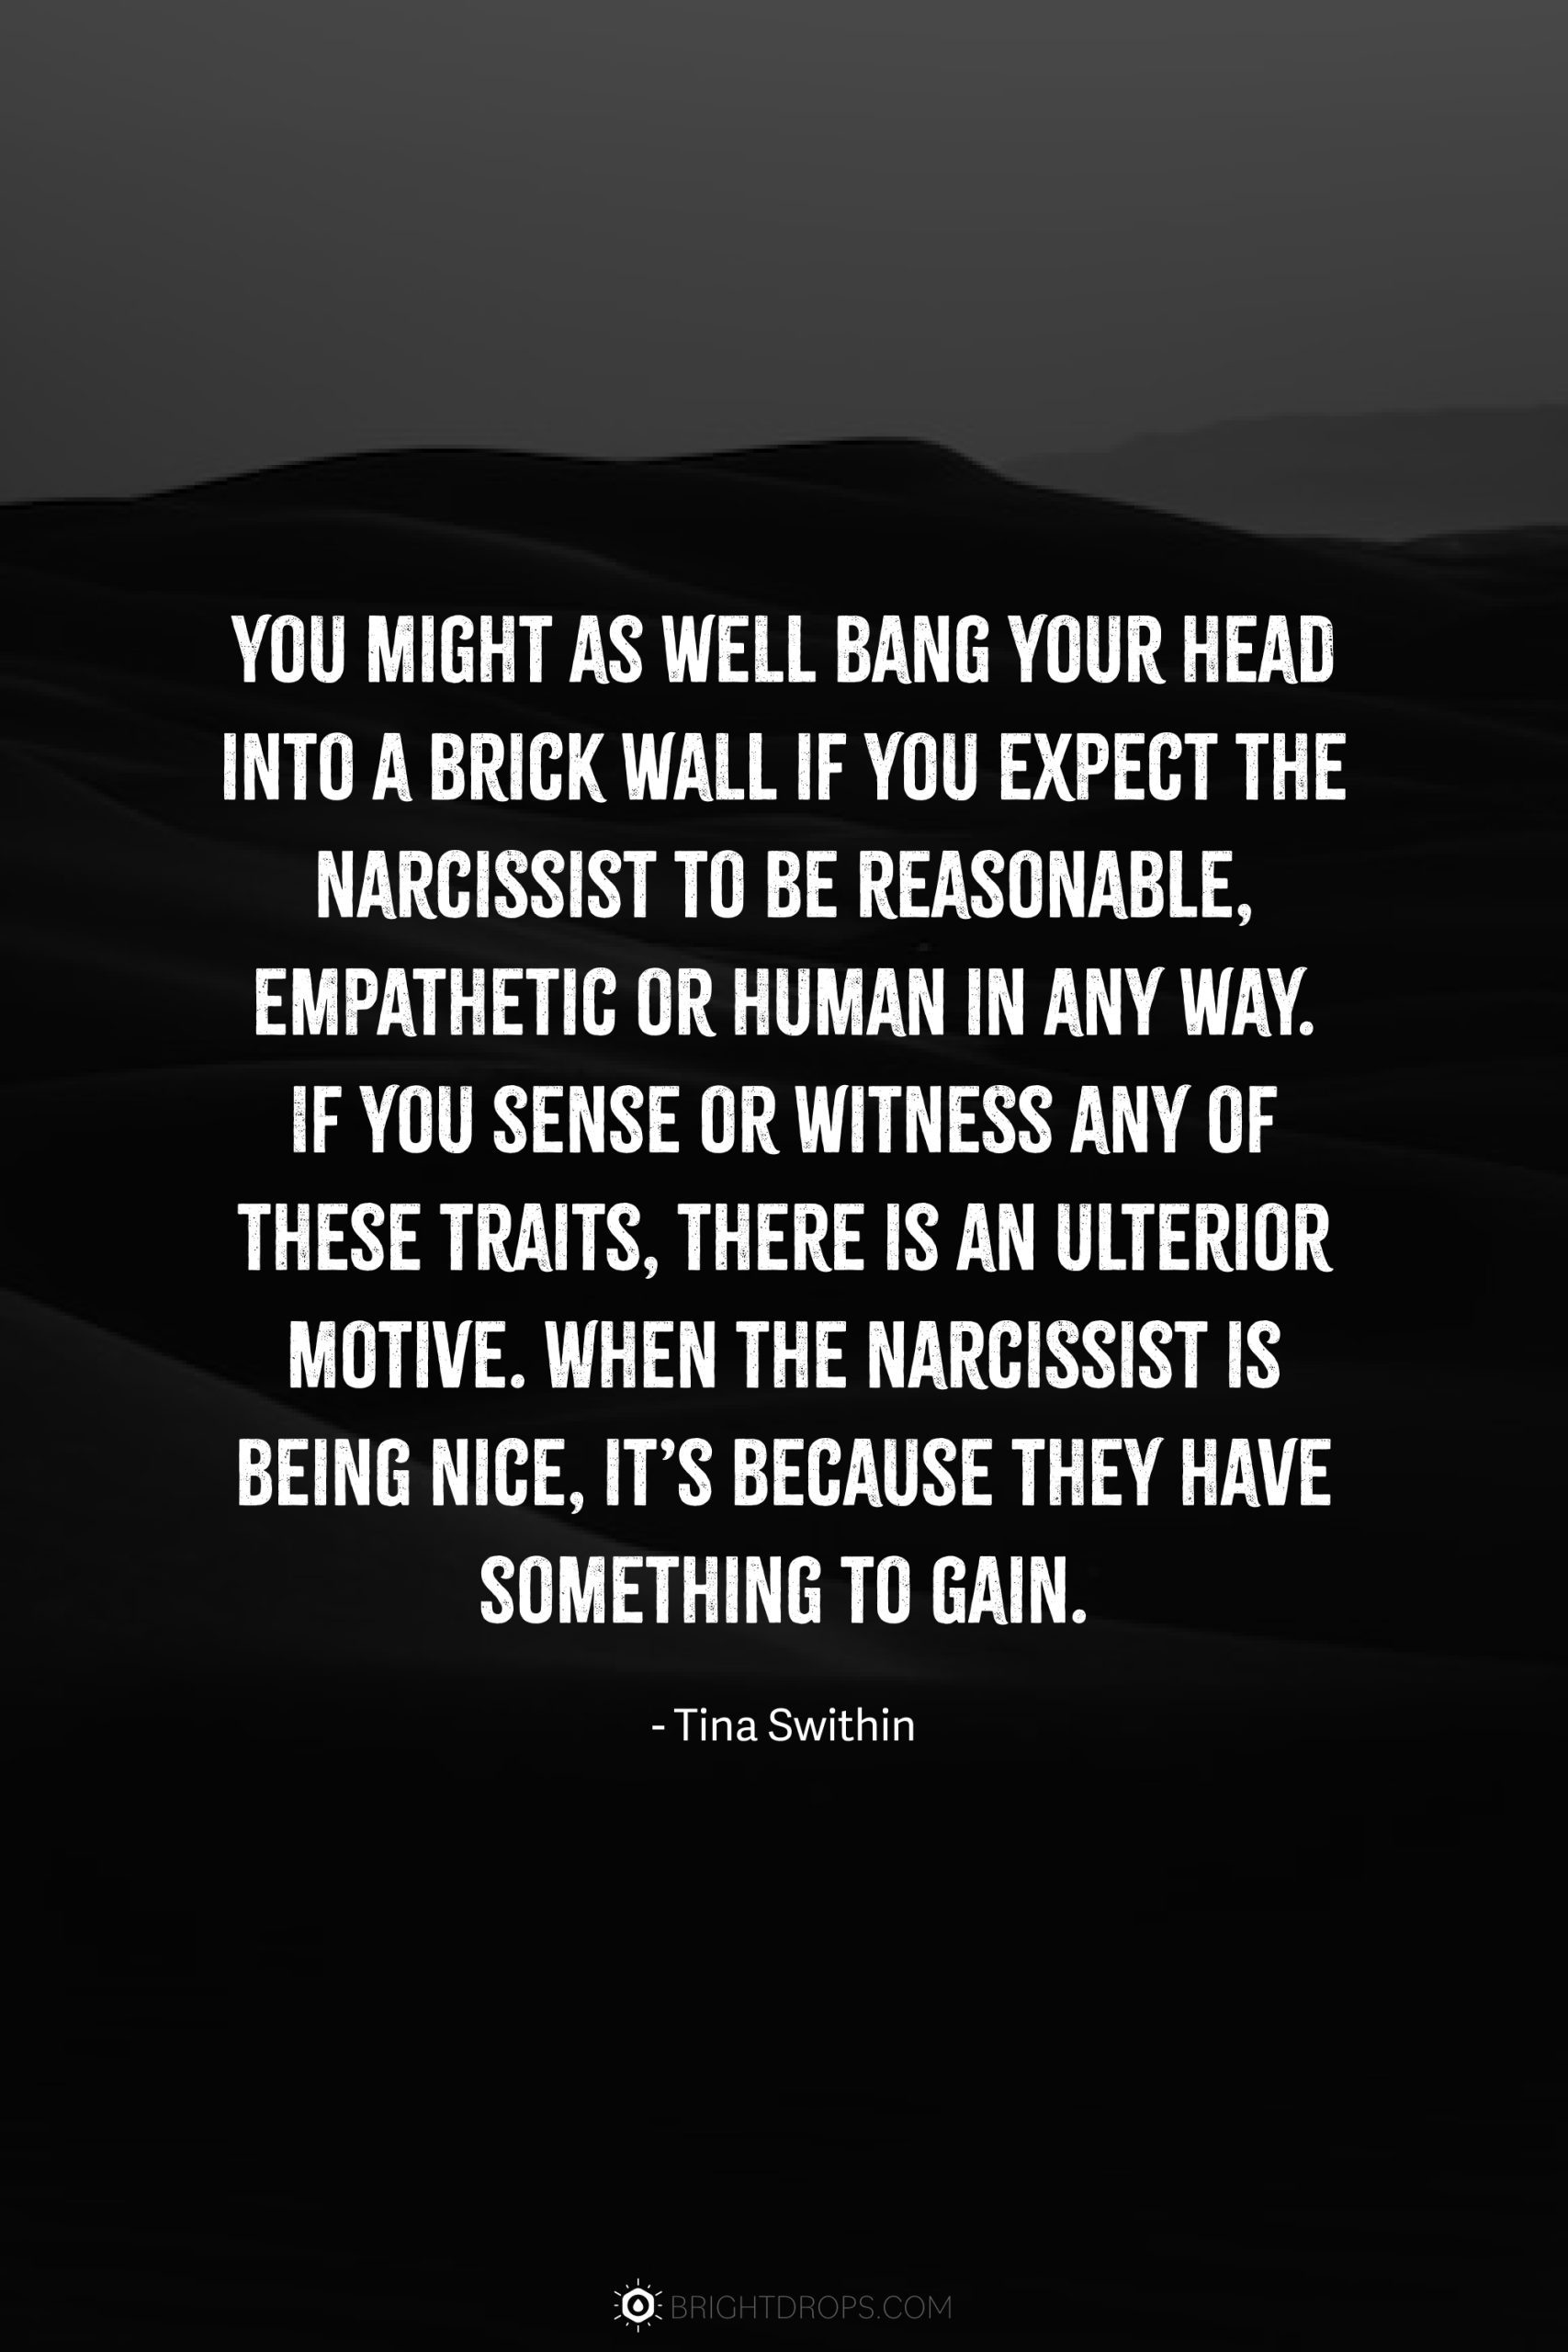 You might as well bang your head into a brick wall if you expect the narcissist to be reasonable, empathetic or human in any way. If you sense or witness any of these traits, there is an ulterior motive. When the narcissist is being nice, it’s because they have something to gain.